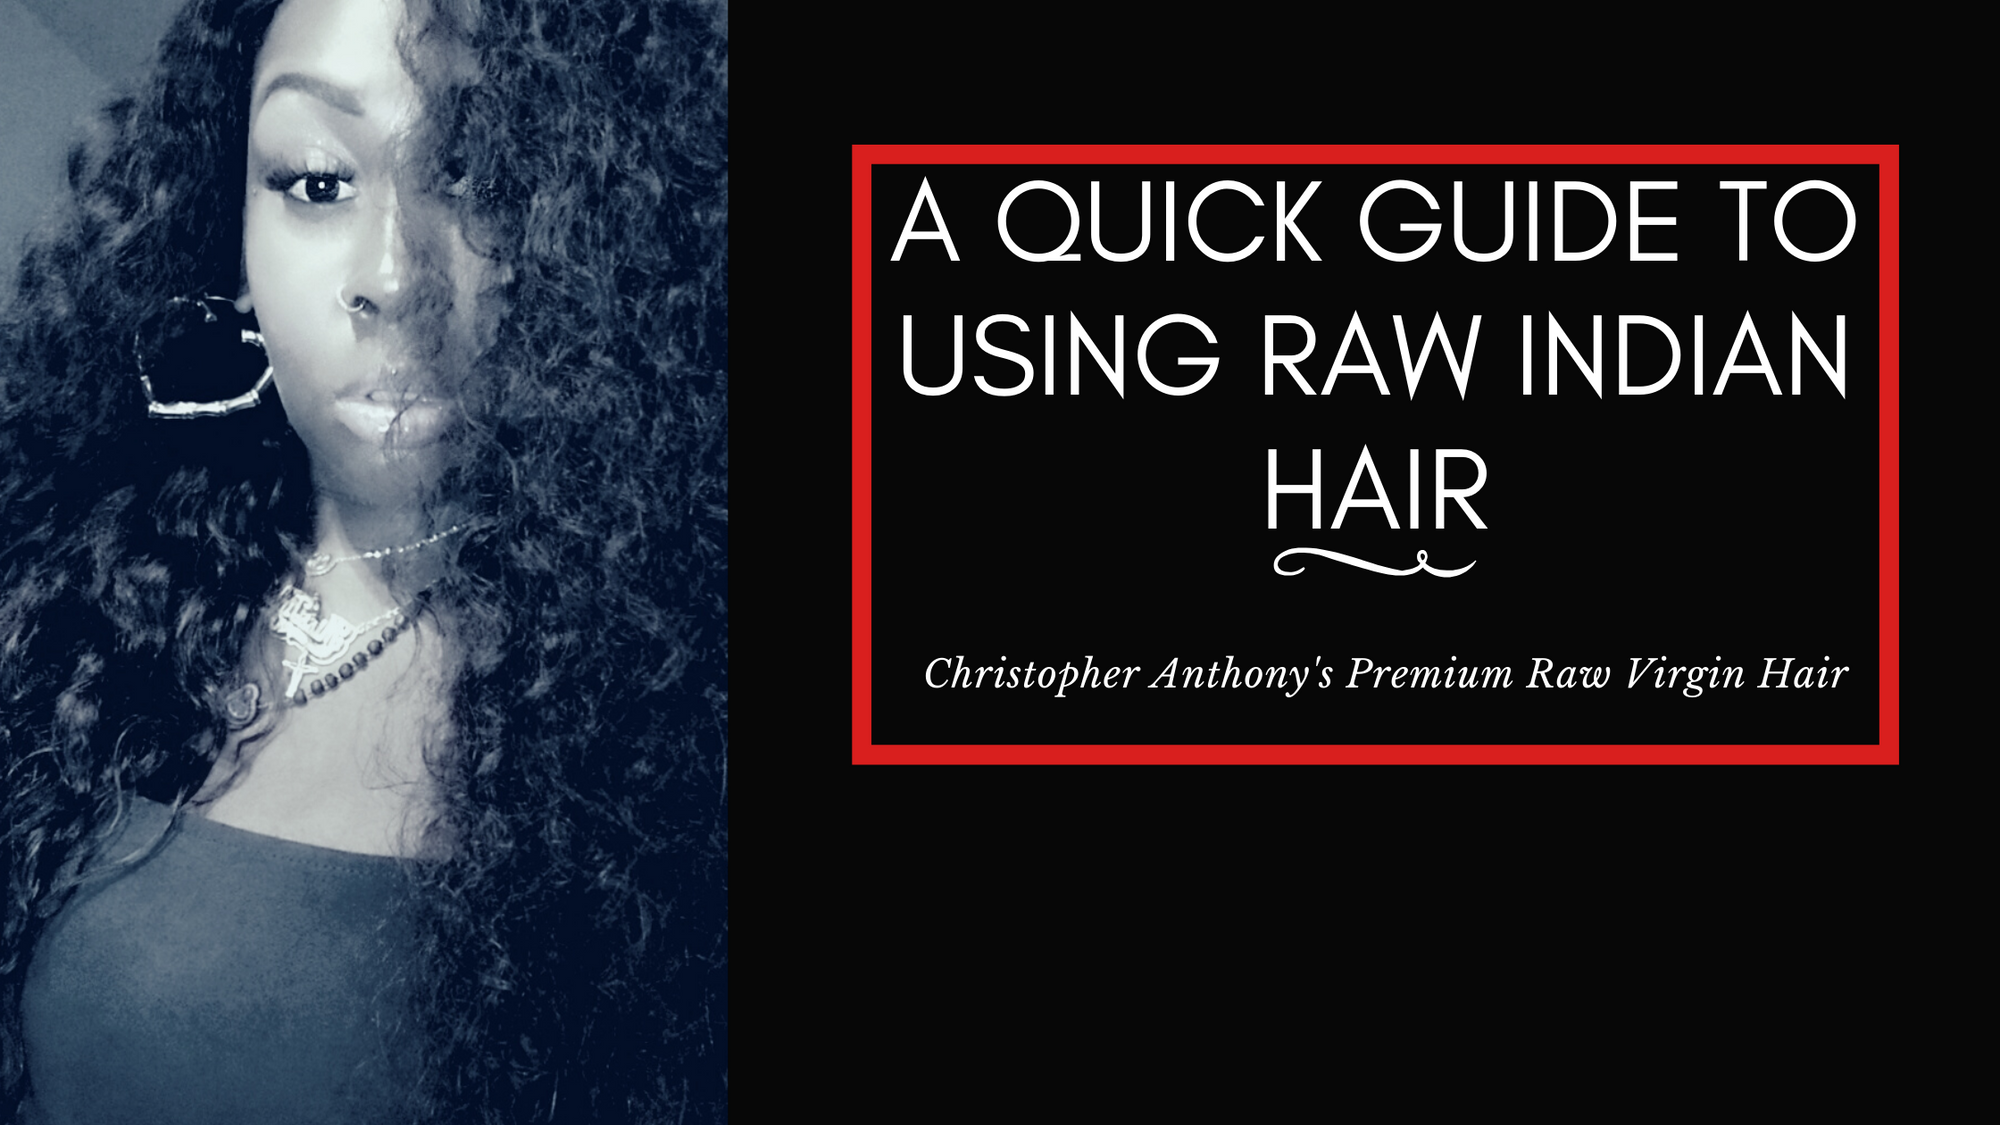 A Quick Guide to Using Raw Indian Hair